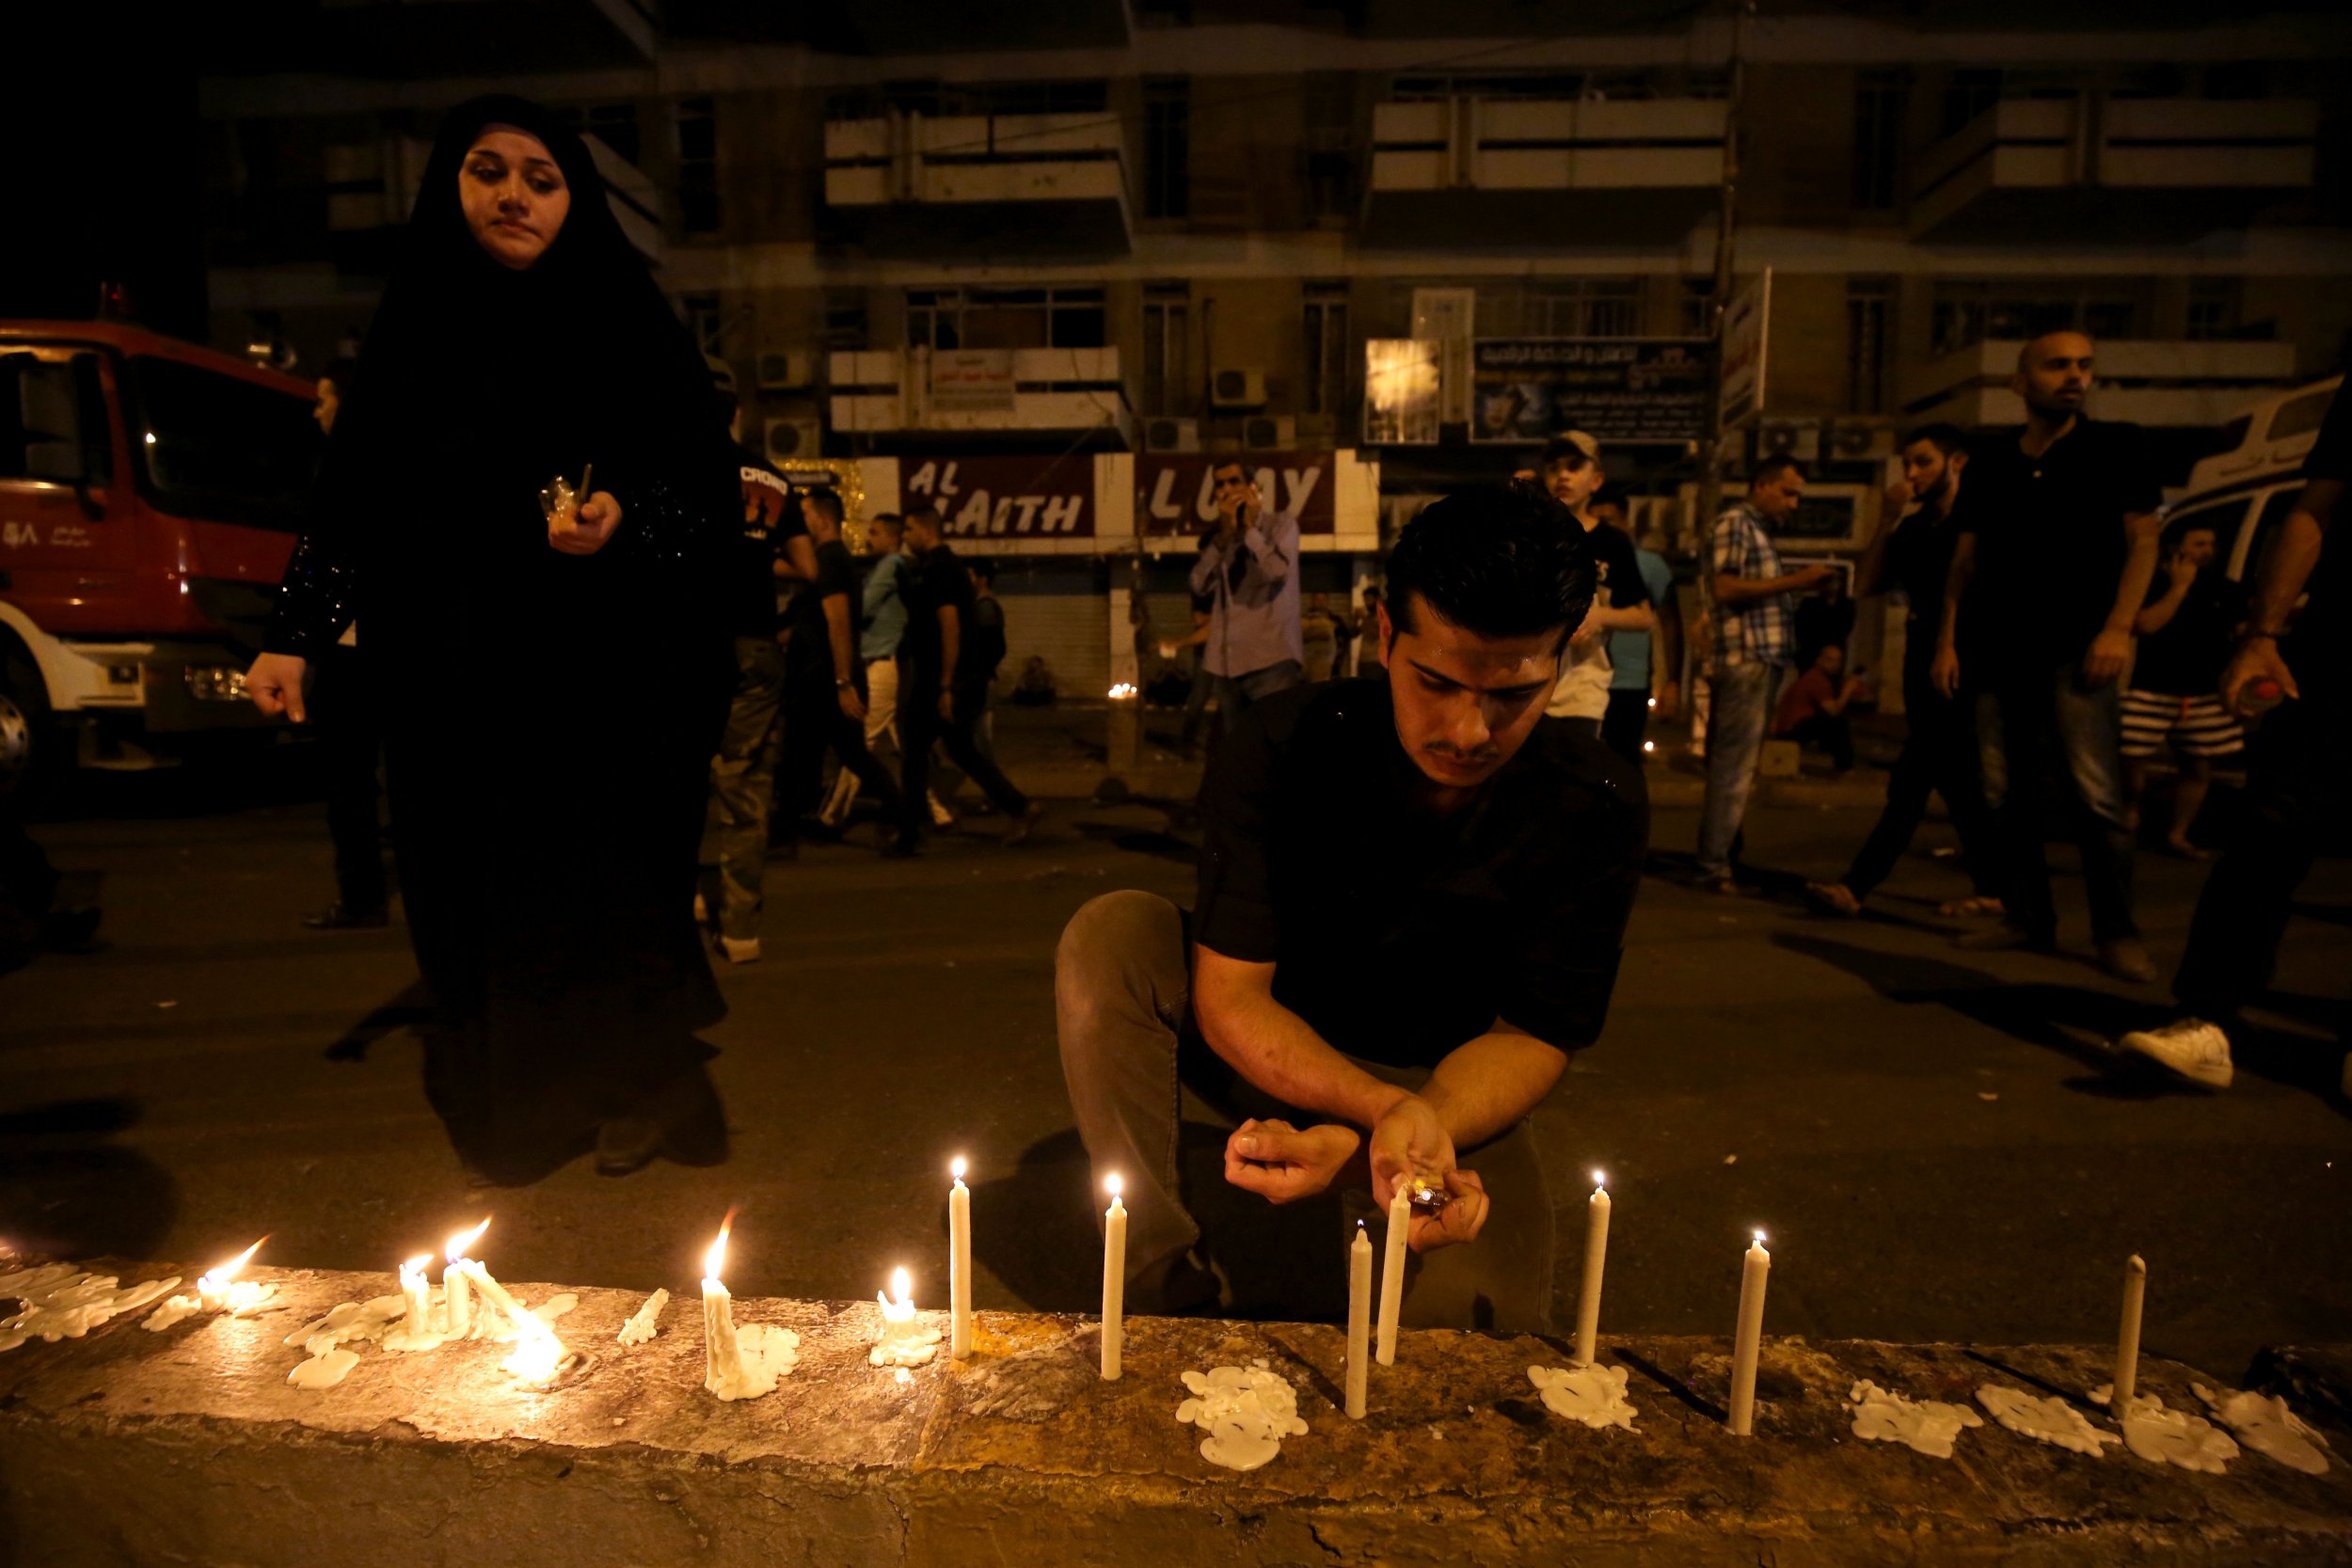 Iraqis light candles after Baghdad bombing